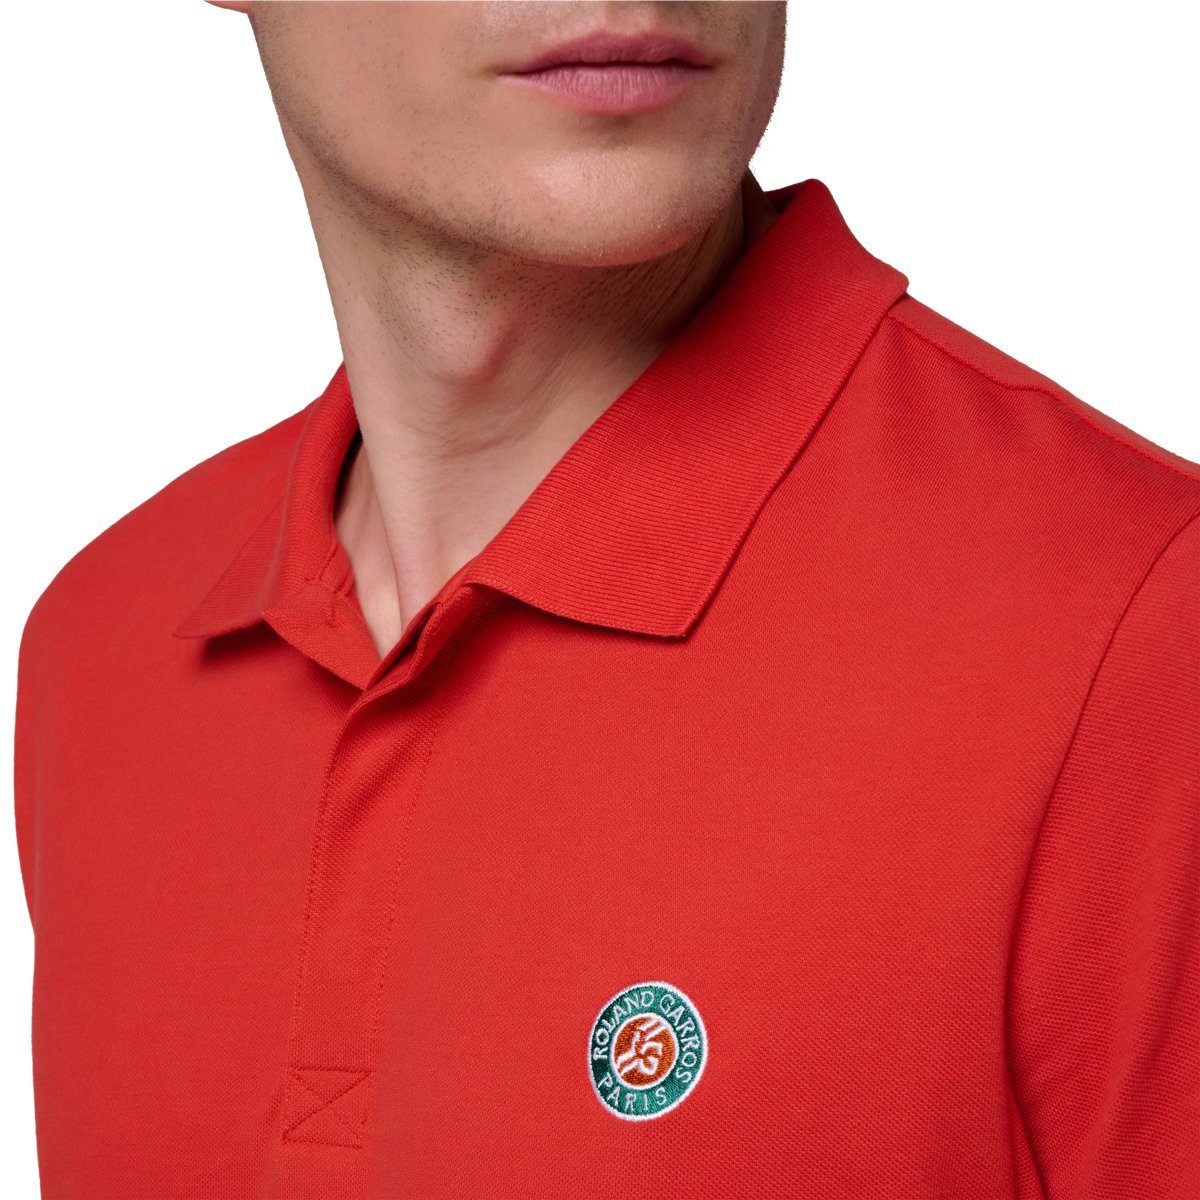 Polo manches longues Homme Roland-Garros - Marine